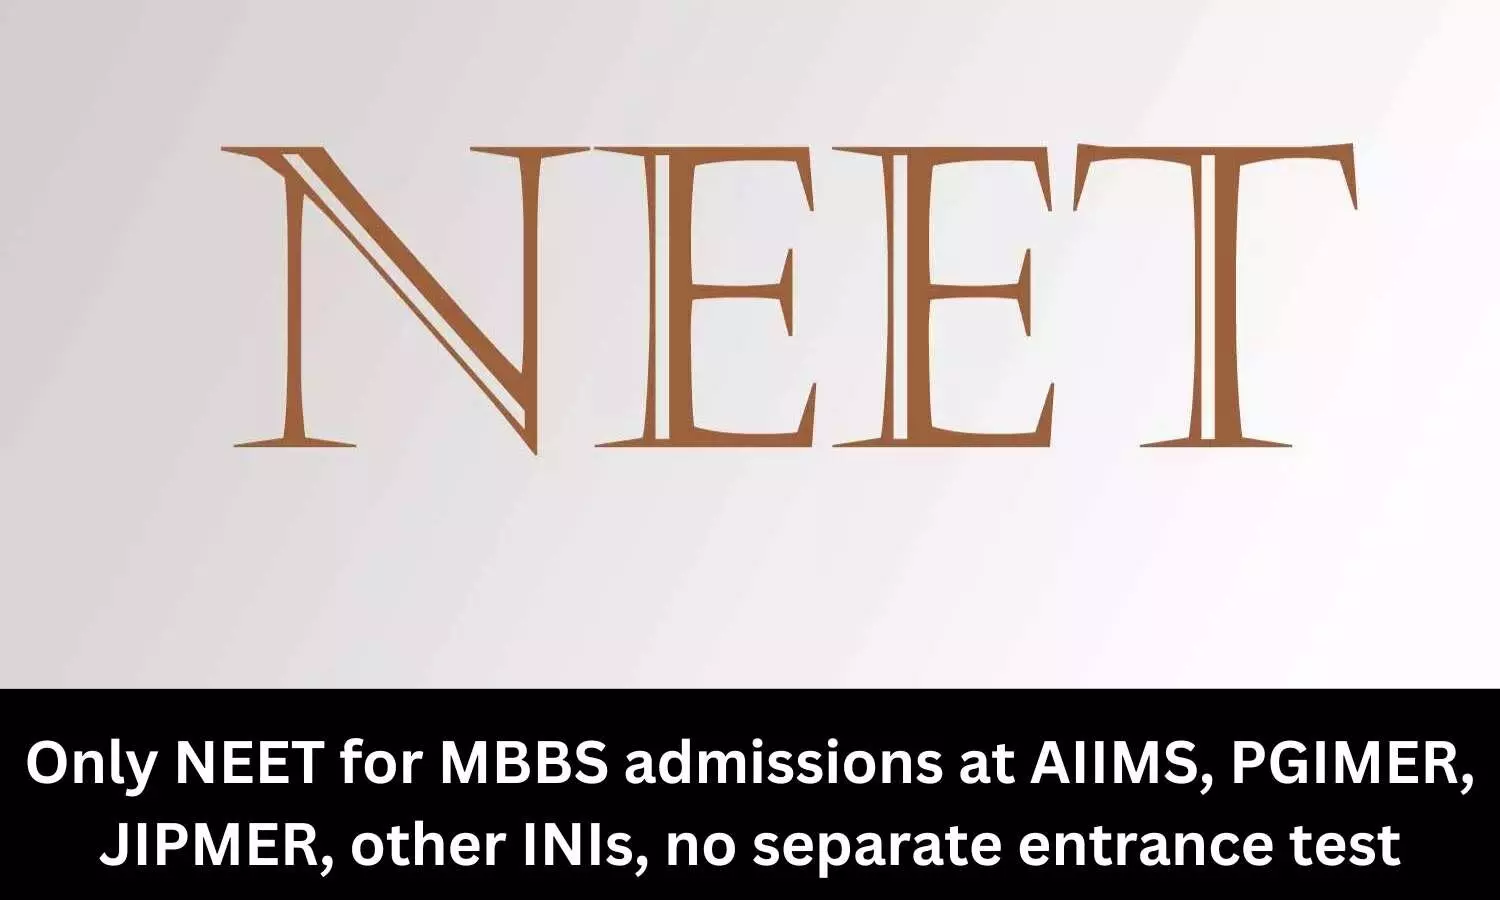 Only NEET for MBBS admissions at JIPMER, PGIMER, AIIMS, other INIs, no separate entrance test